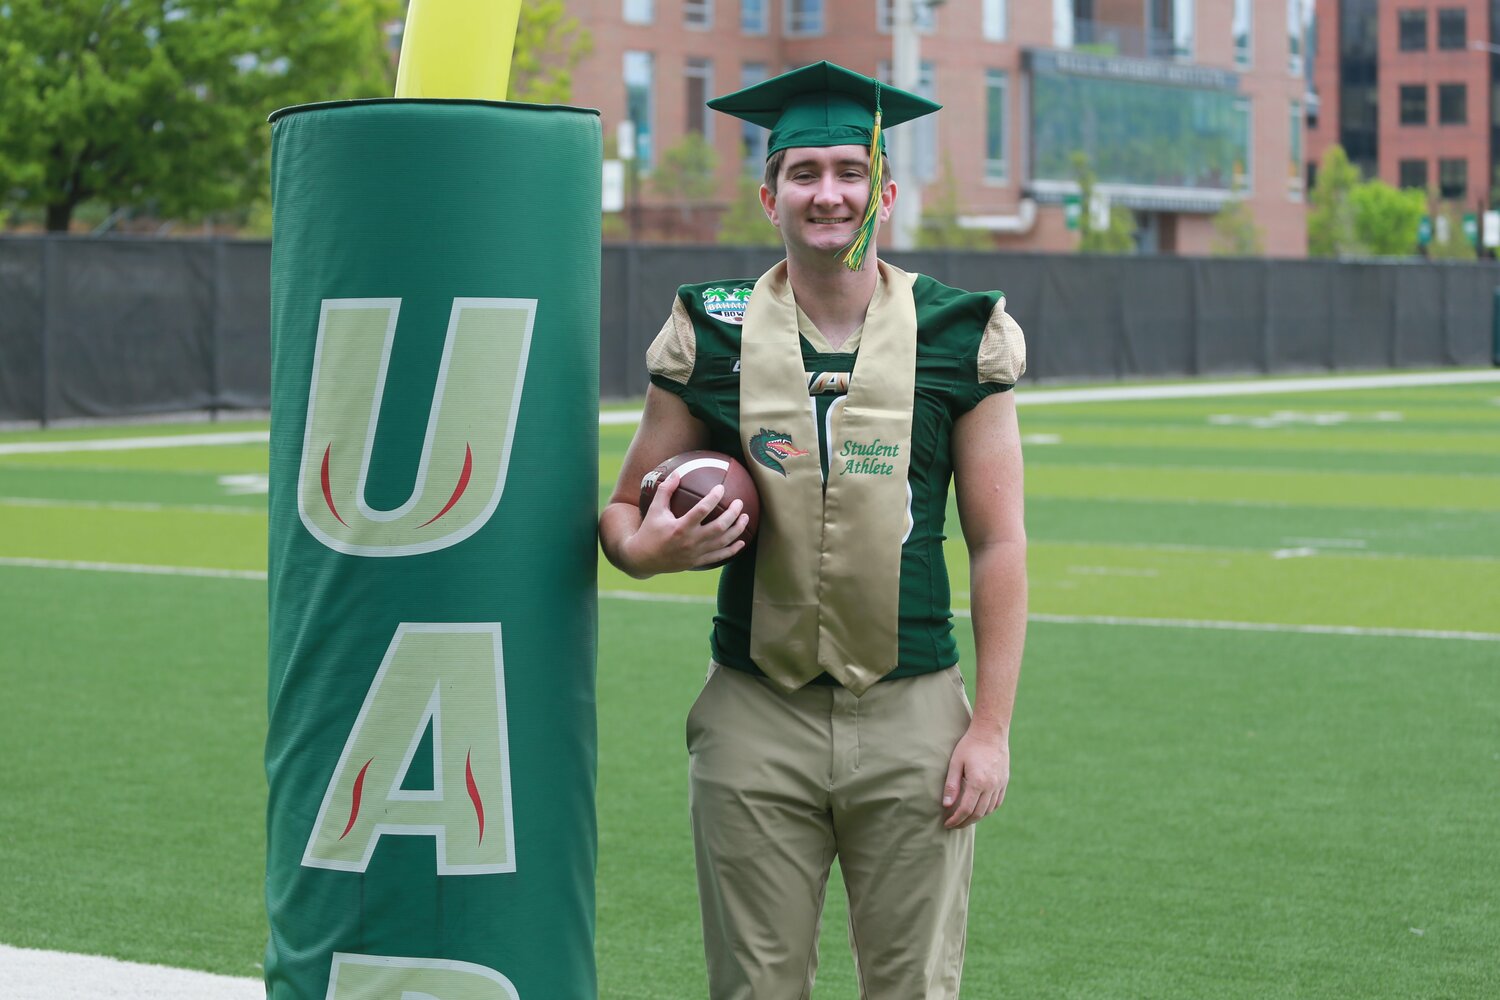 Spanish Fort alum and UAB graduate Matt Quinn was recently named Conference USA’s Football Scholar Athlete of the Year after he successfully made all 45 of his point-after tries and finished his accounting and finance major with a 3.90 GPA.